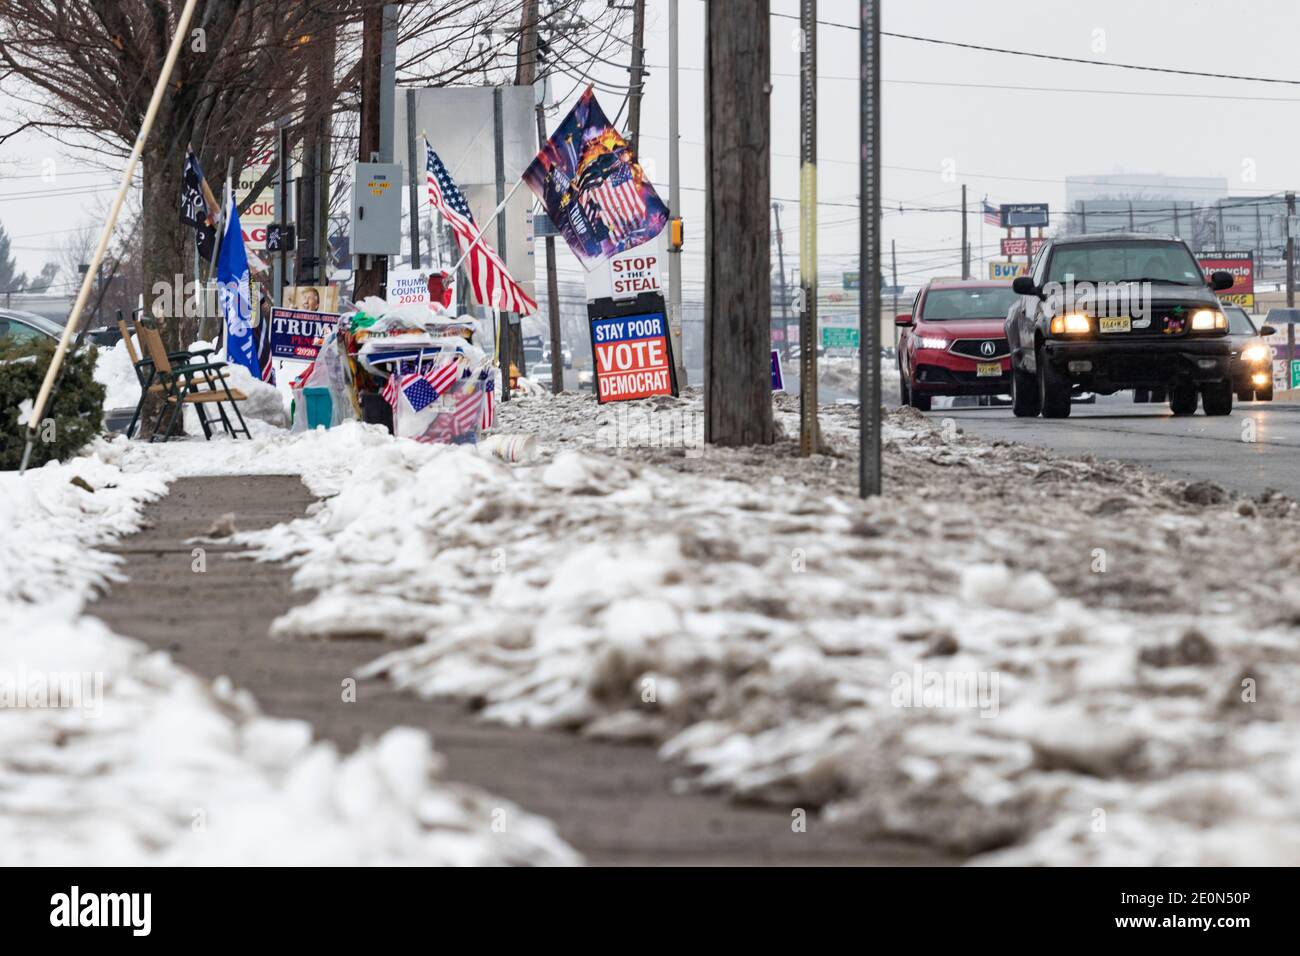 Various pro-Trump and anti-Biden signs and flags, set up roadside by Trump supporters in the snow several weeks after Trump loss in the 2020 election Stock Photo